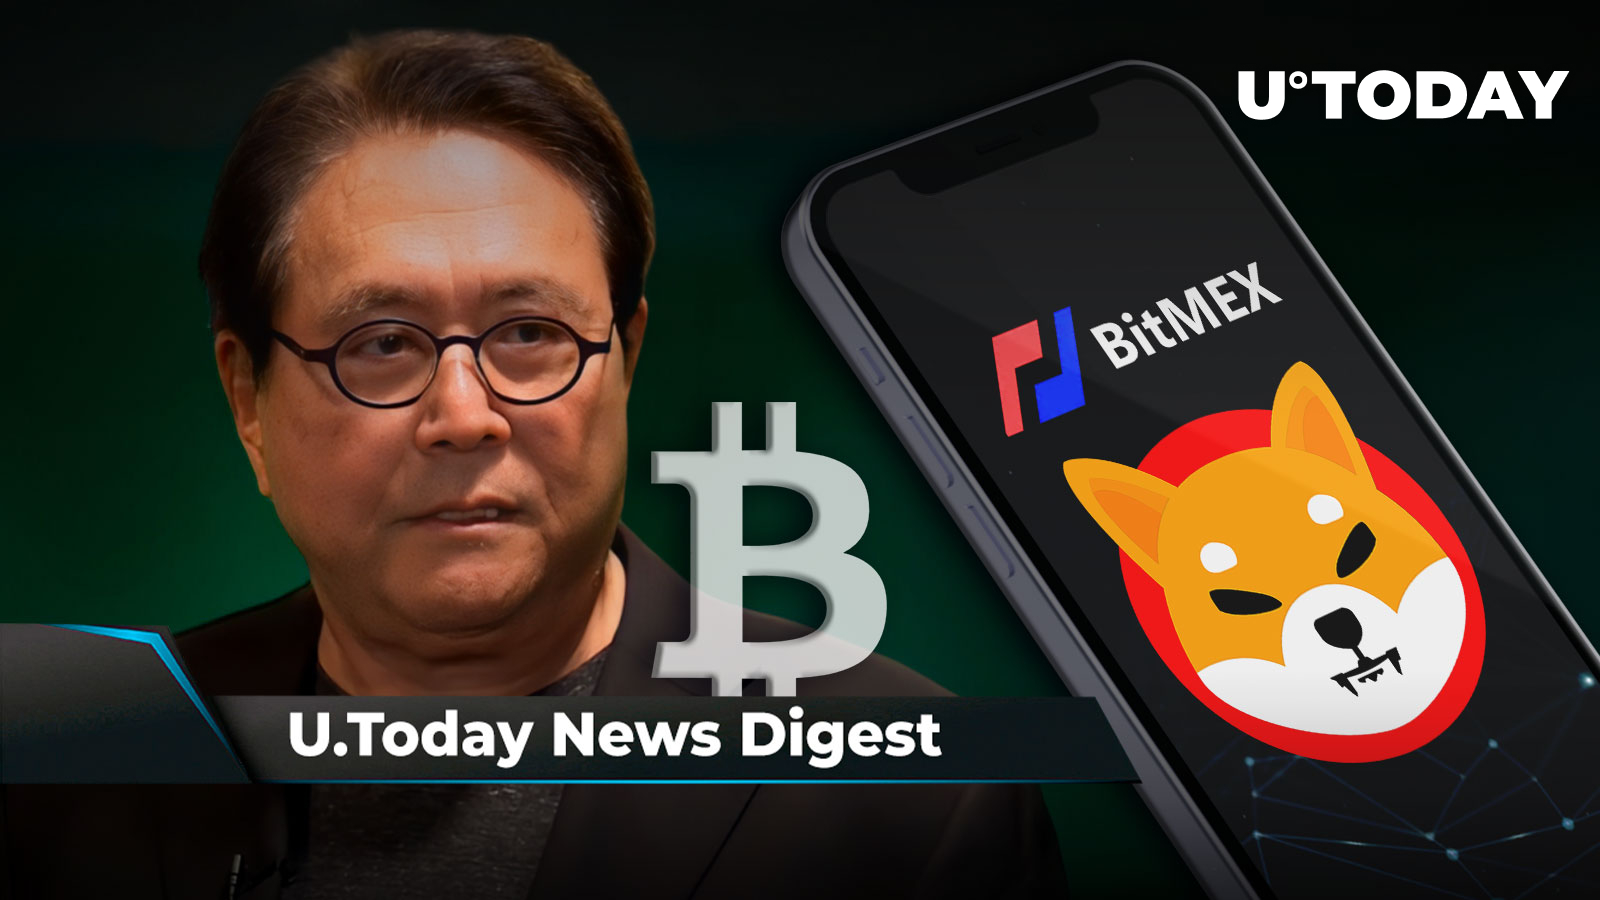 “Rich Dad, Poor Dad” Author Says It’s Time for BTC, SHIB Finally Listed on BitMex, This Could Reduce Ripple’s Chance to Win SEC: Crypto News Digest by U.Today